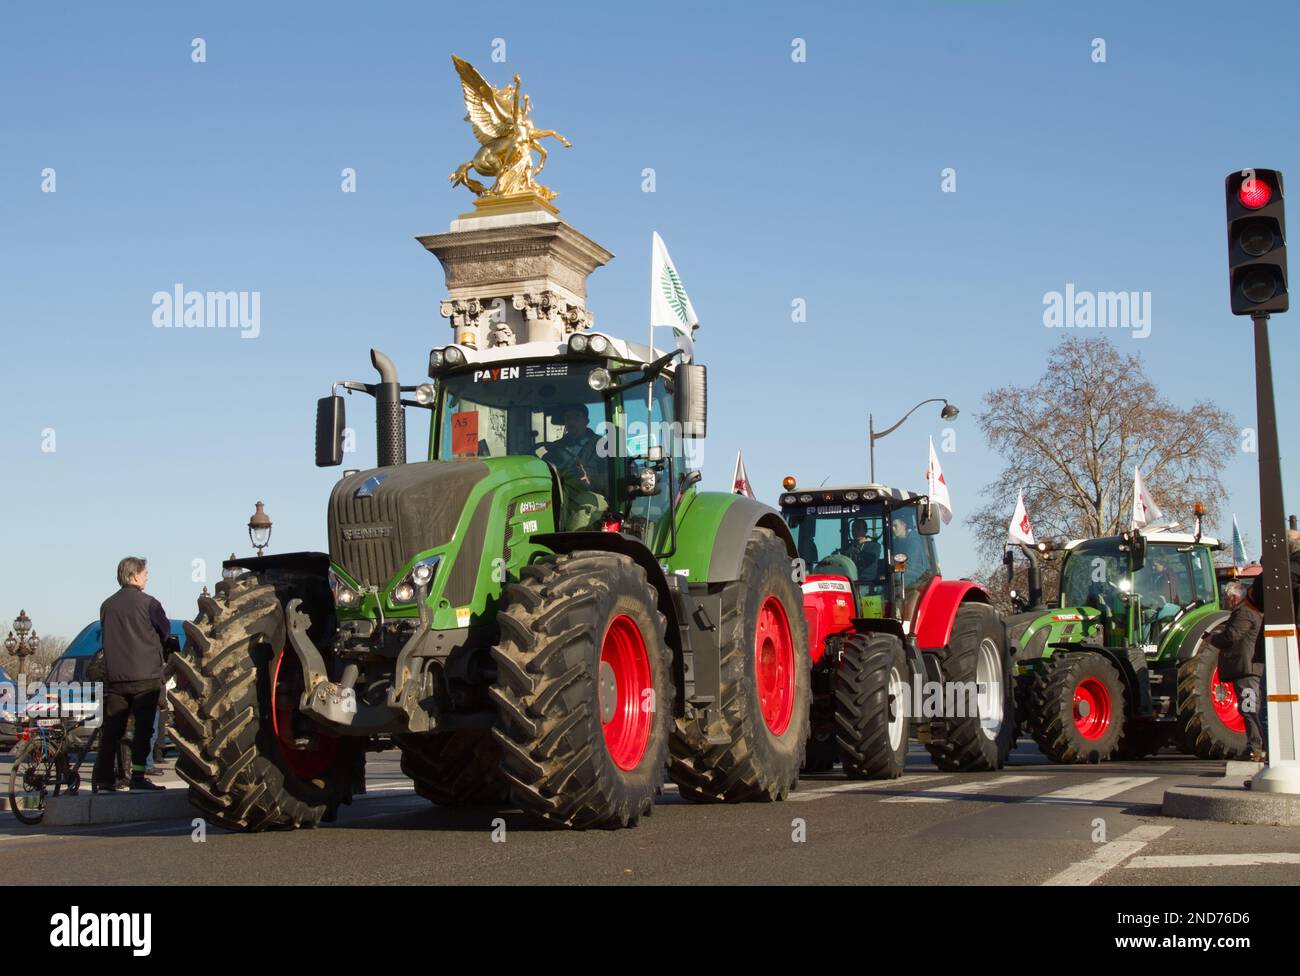 Procession Of Tractors At Pont Alexander, Paris, Protesting Against The French Government., 8th Feb 2023 Stock Photo